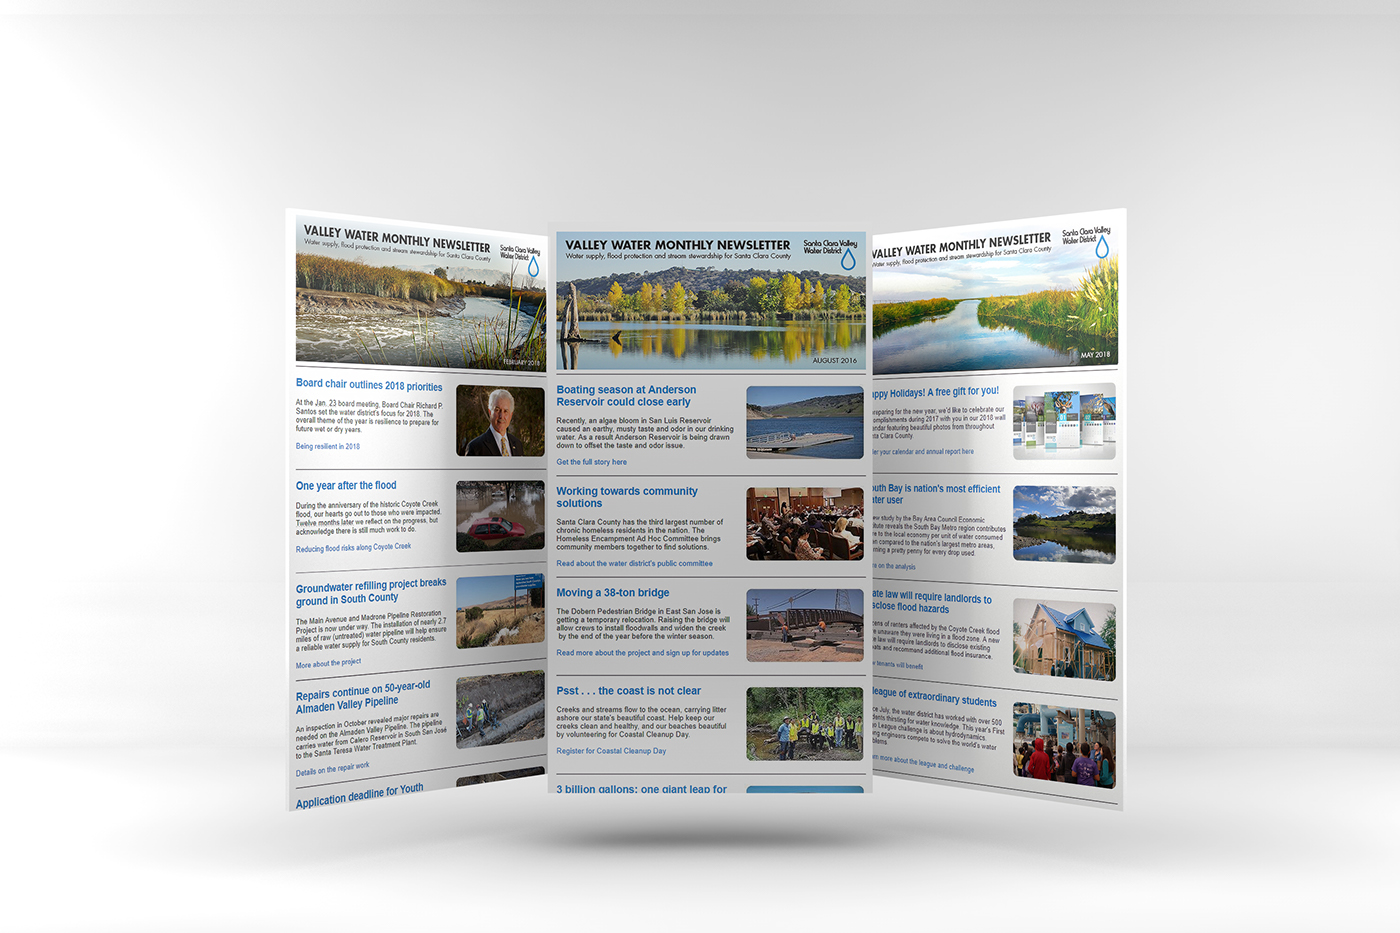 e-newsletter e-news e-newsletter header Constant Contact One Page template enewsletter Santa Clara Valley water district responsive enewsletter